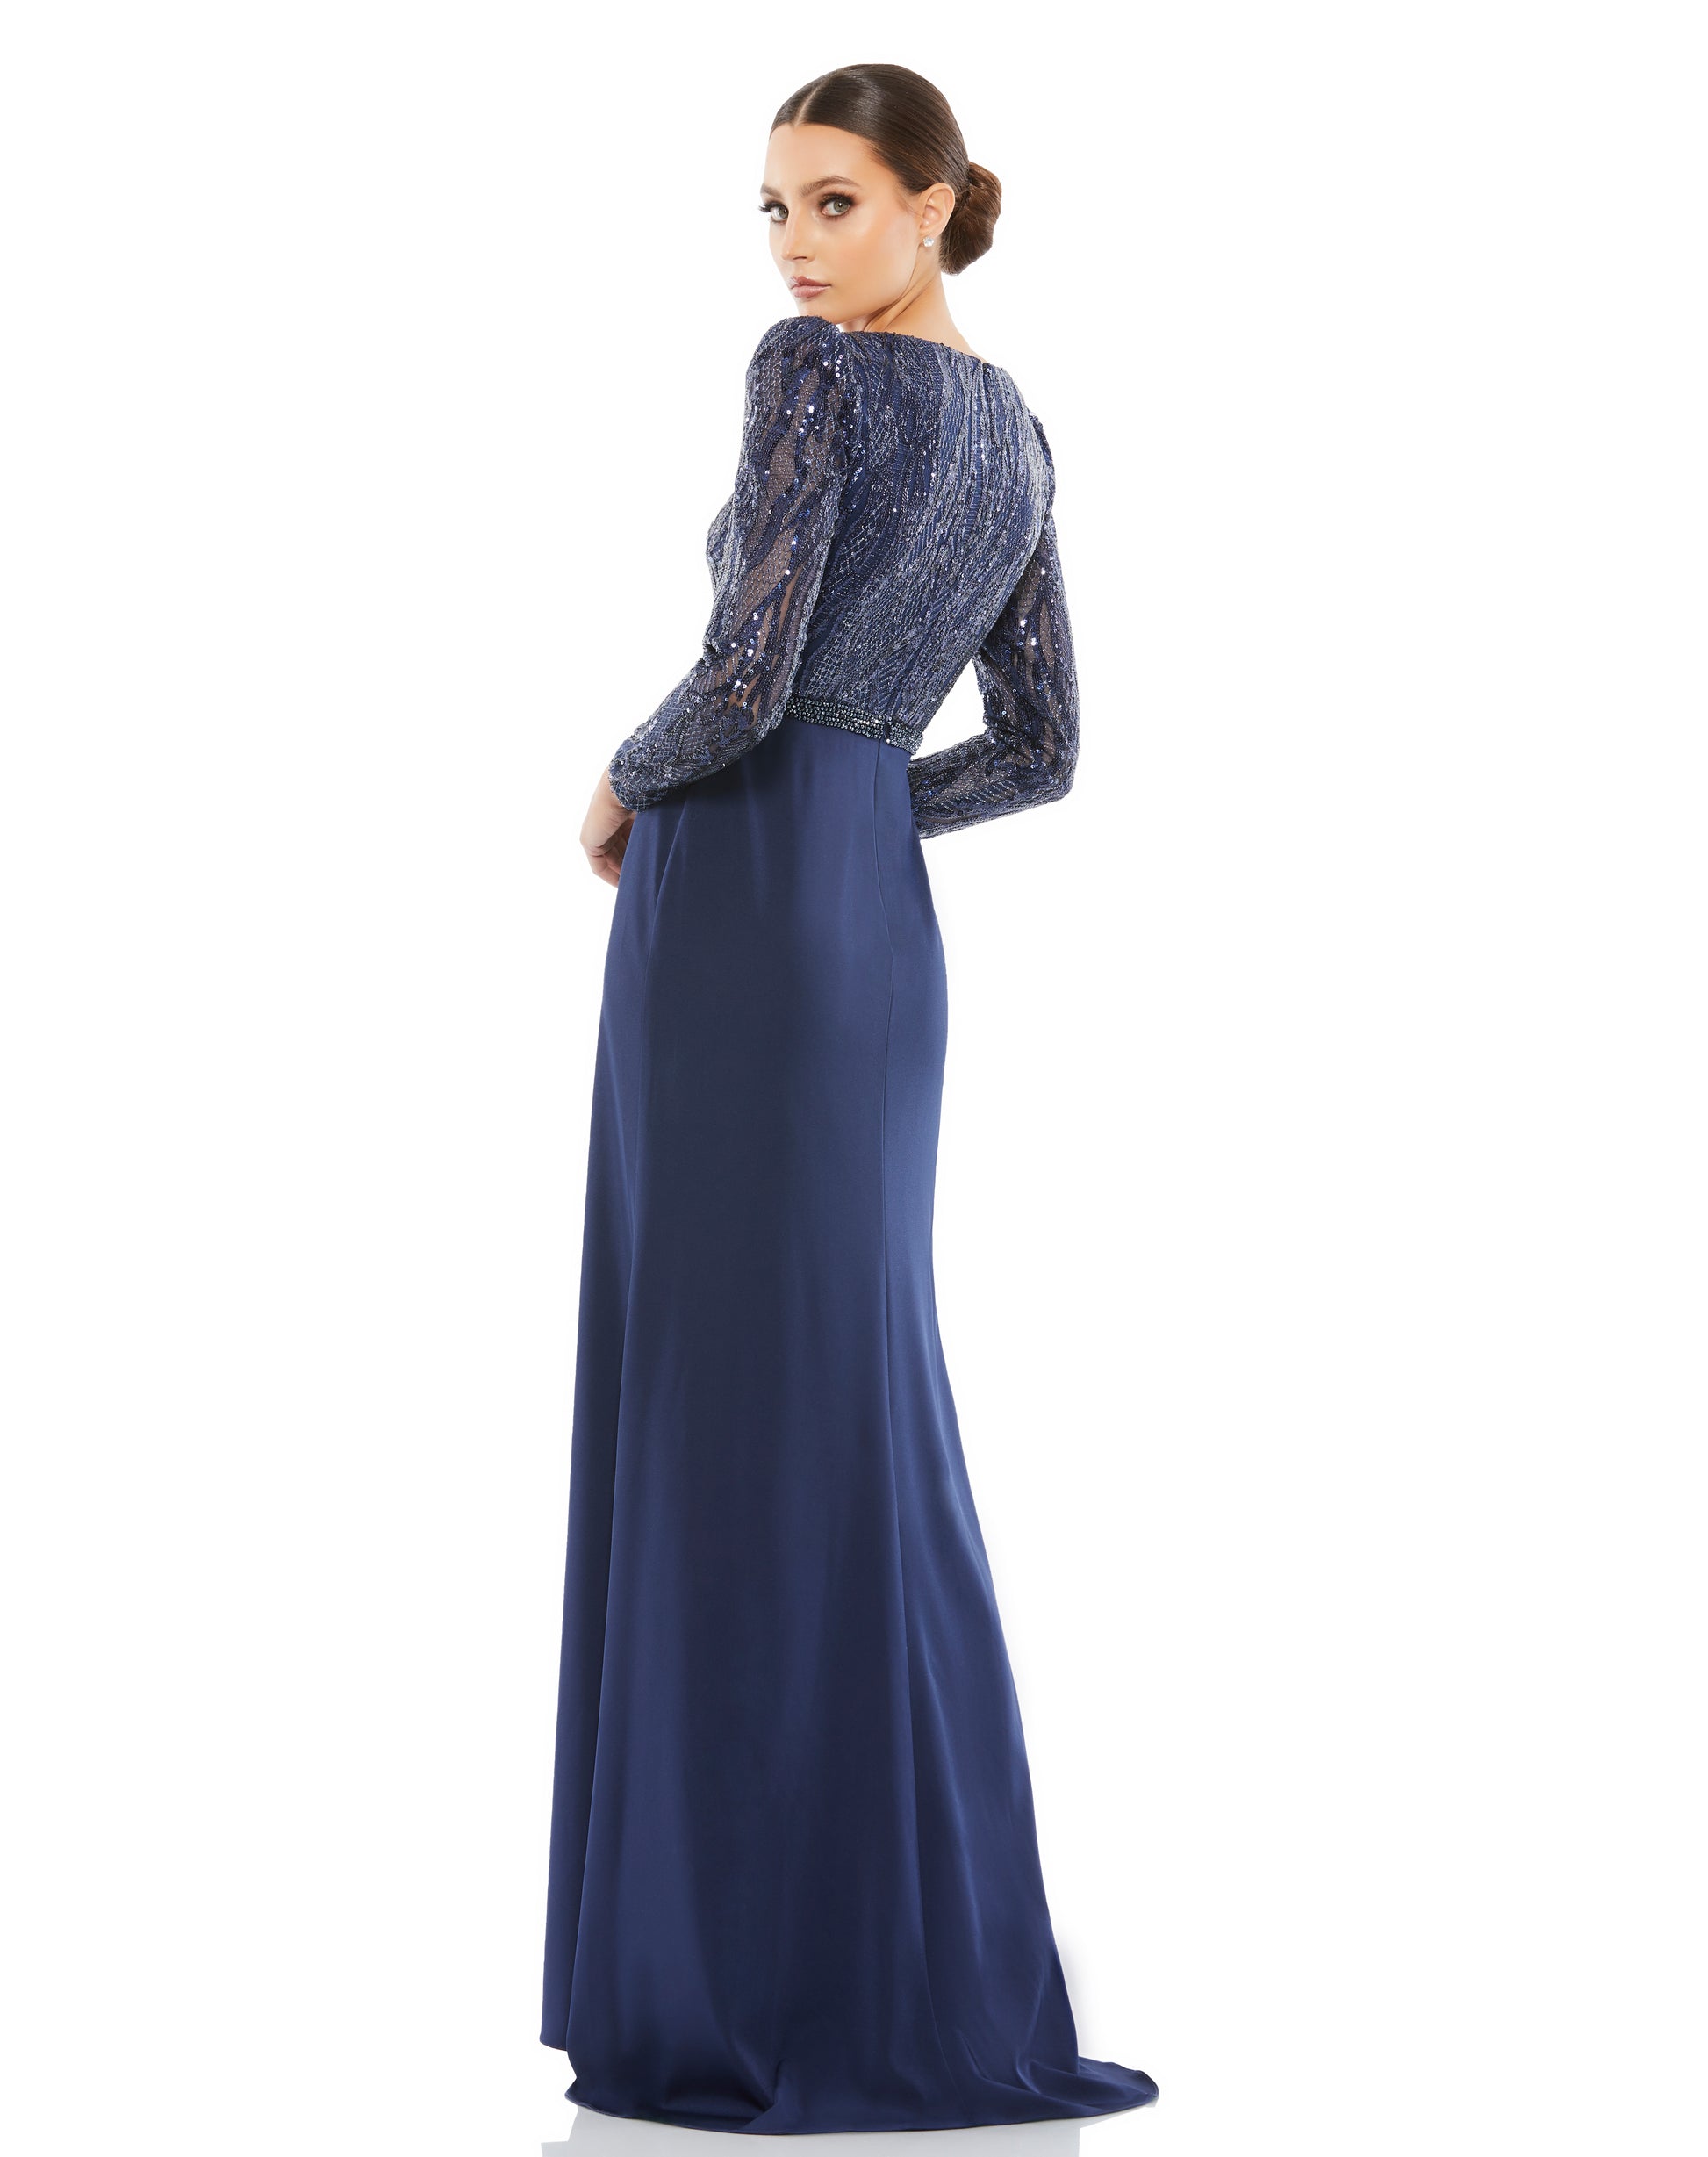 An elegant option for evening weddings and social events, this mixed-media gown is fashioned with a dramatic glittering embellished bodice offset by a sleek, minimalist crepe skirt. The dress opens with a modern V-neckline that perfectly frames a pendant,